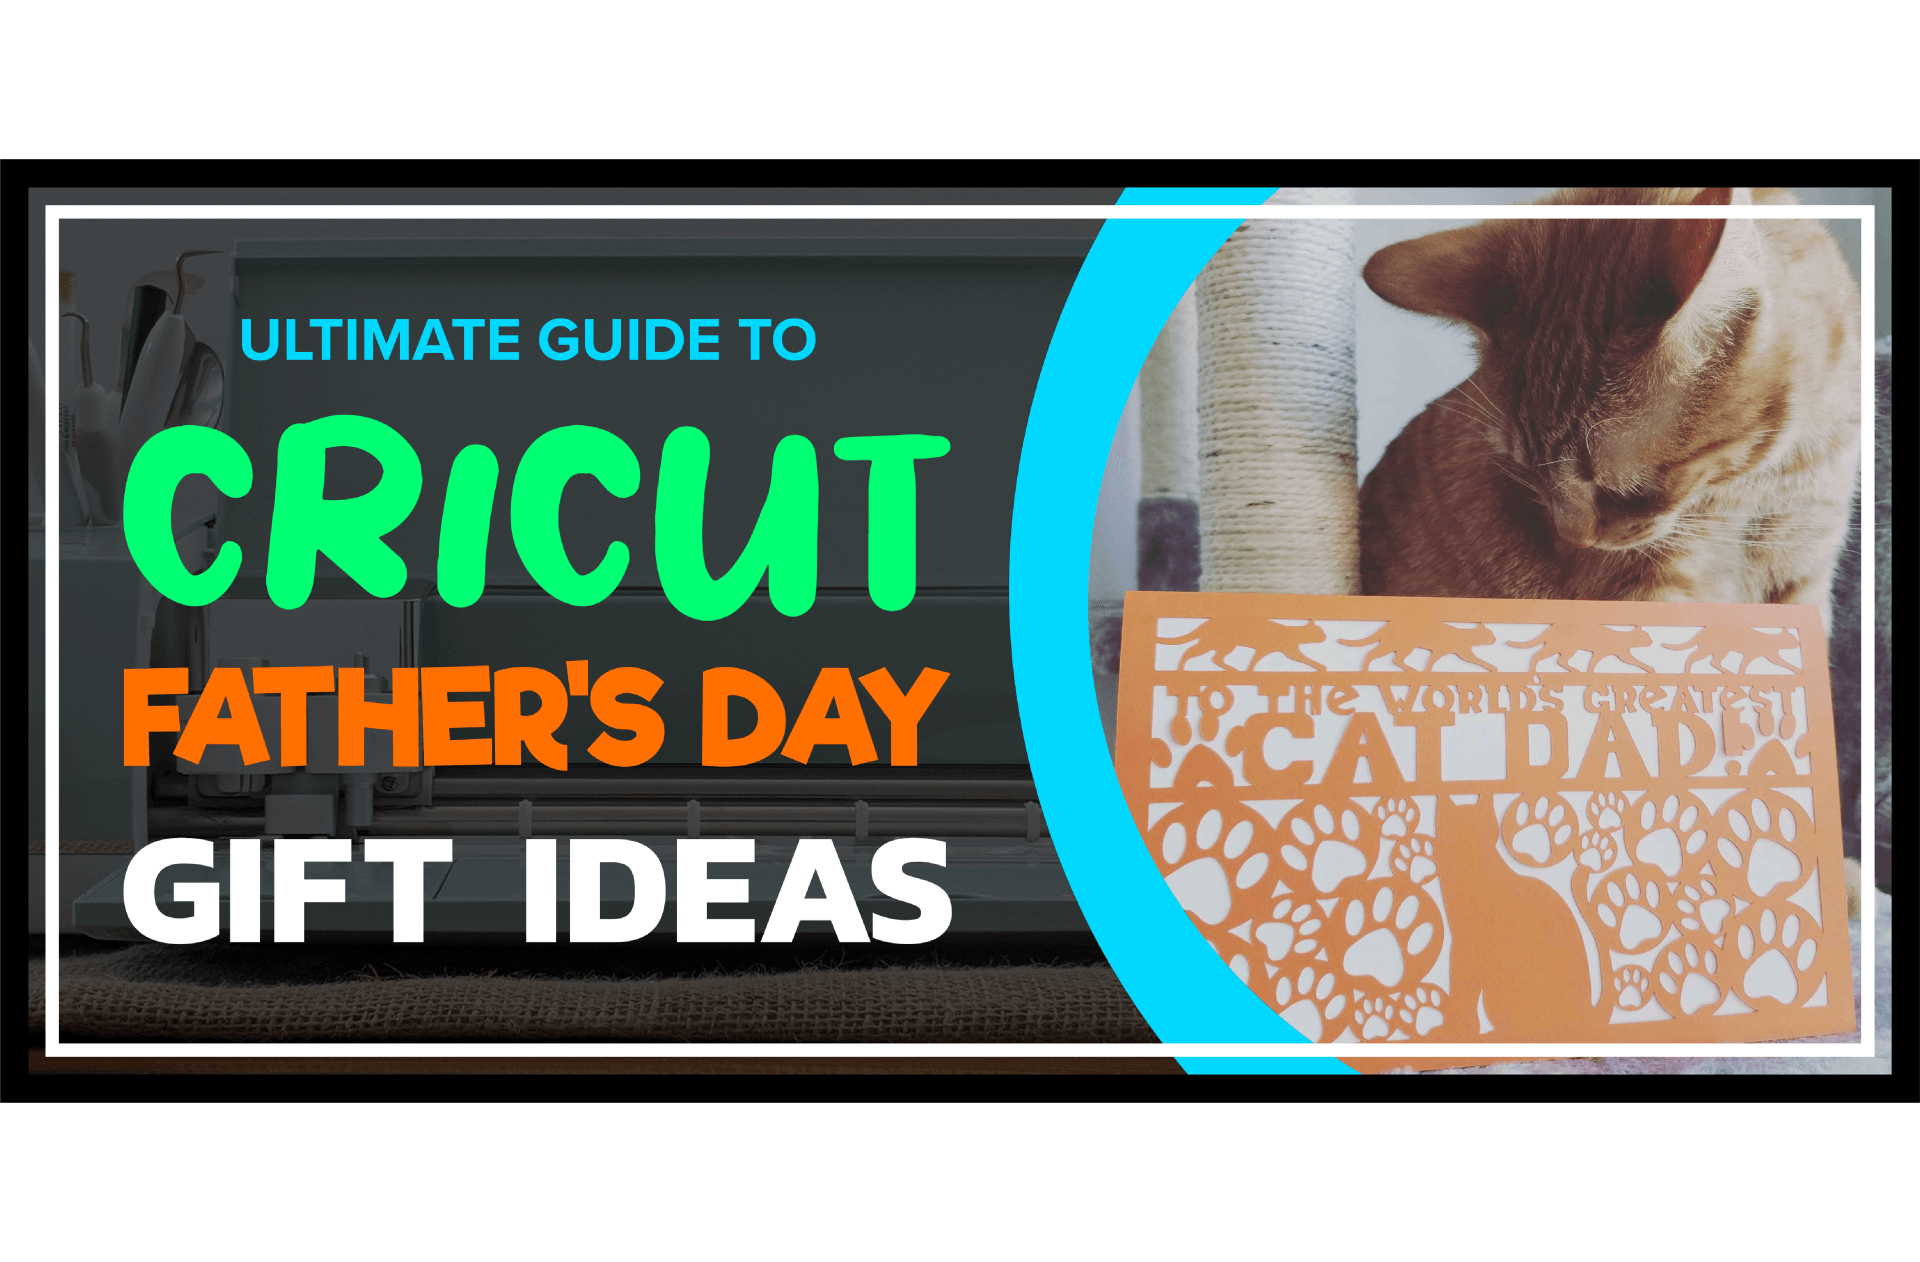 The Ultimate Guide to Easy Cricut Father's Day Gift Ideas